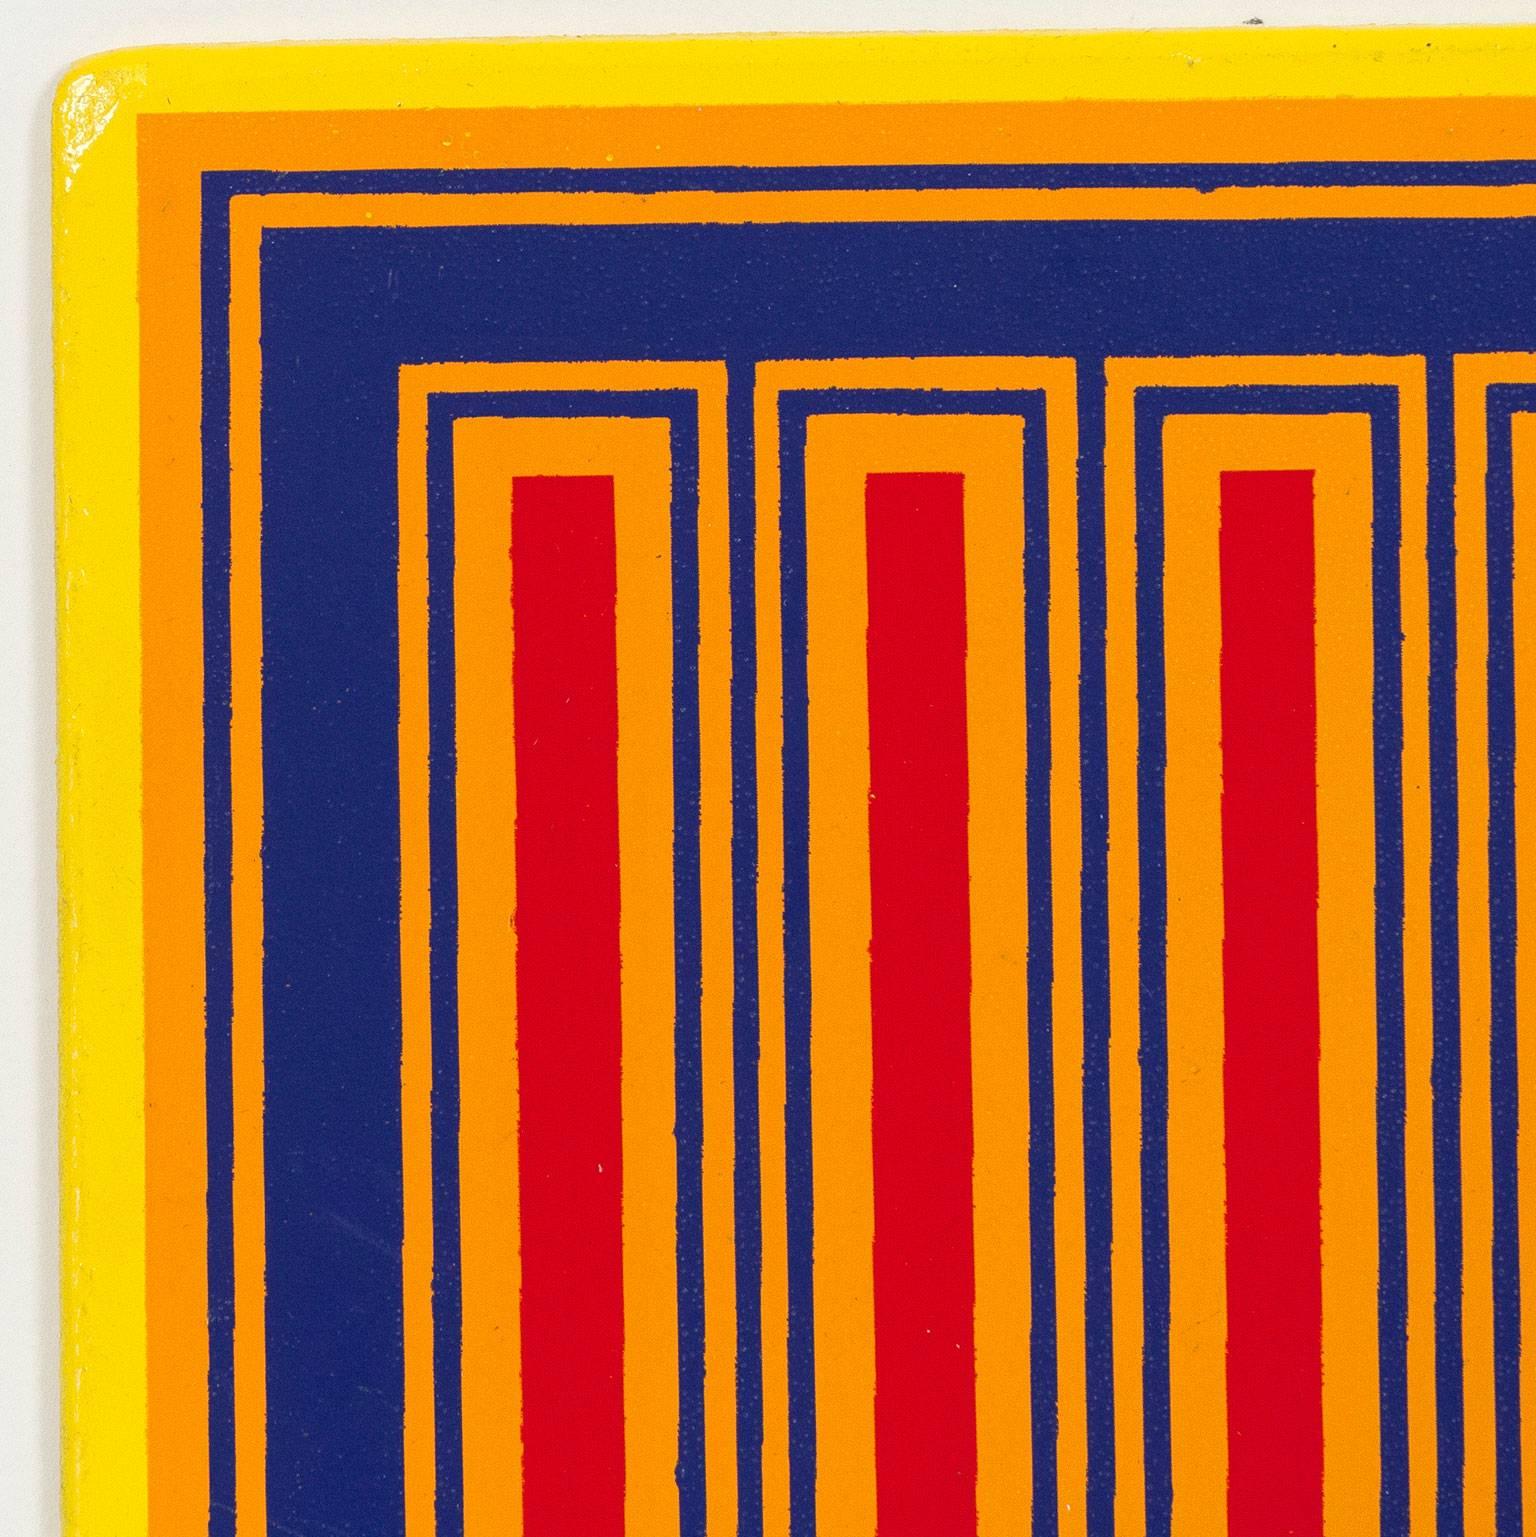 One of favorite American artists, Richard Anuskiewicz (b. 1930) is a major player in both Op Art and Hard-Edge Abstraction. His work is typically composed of neon candy colors in strict geometries. 

Josef Albers was a mentor to Anuskiewicz. However